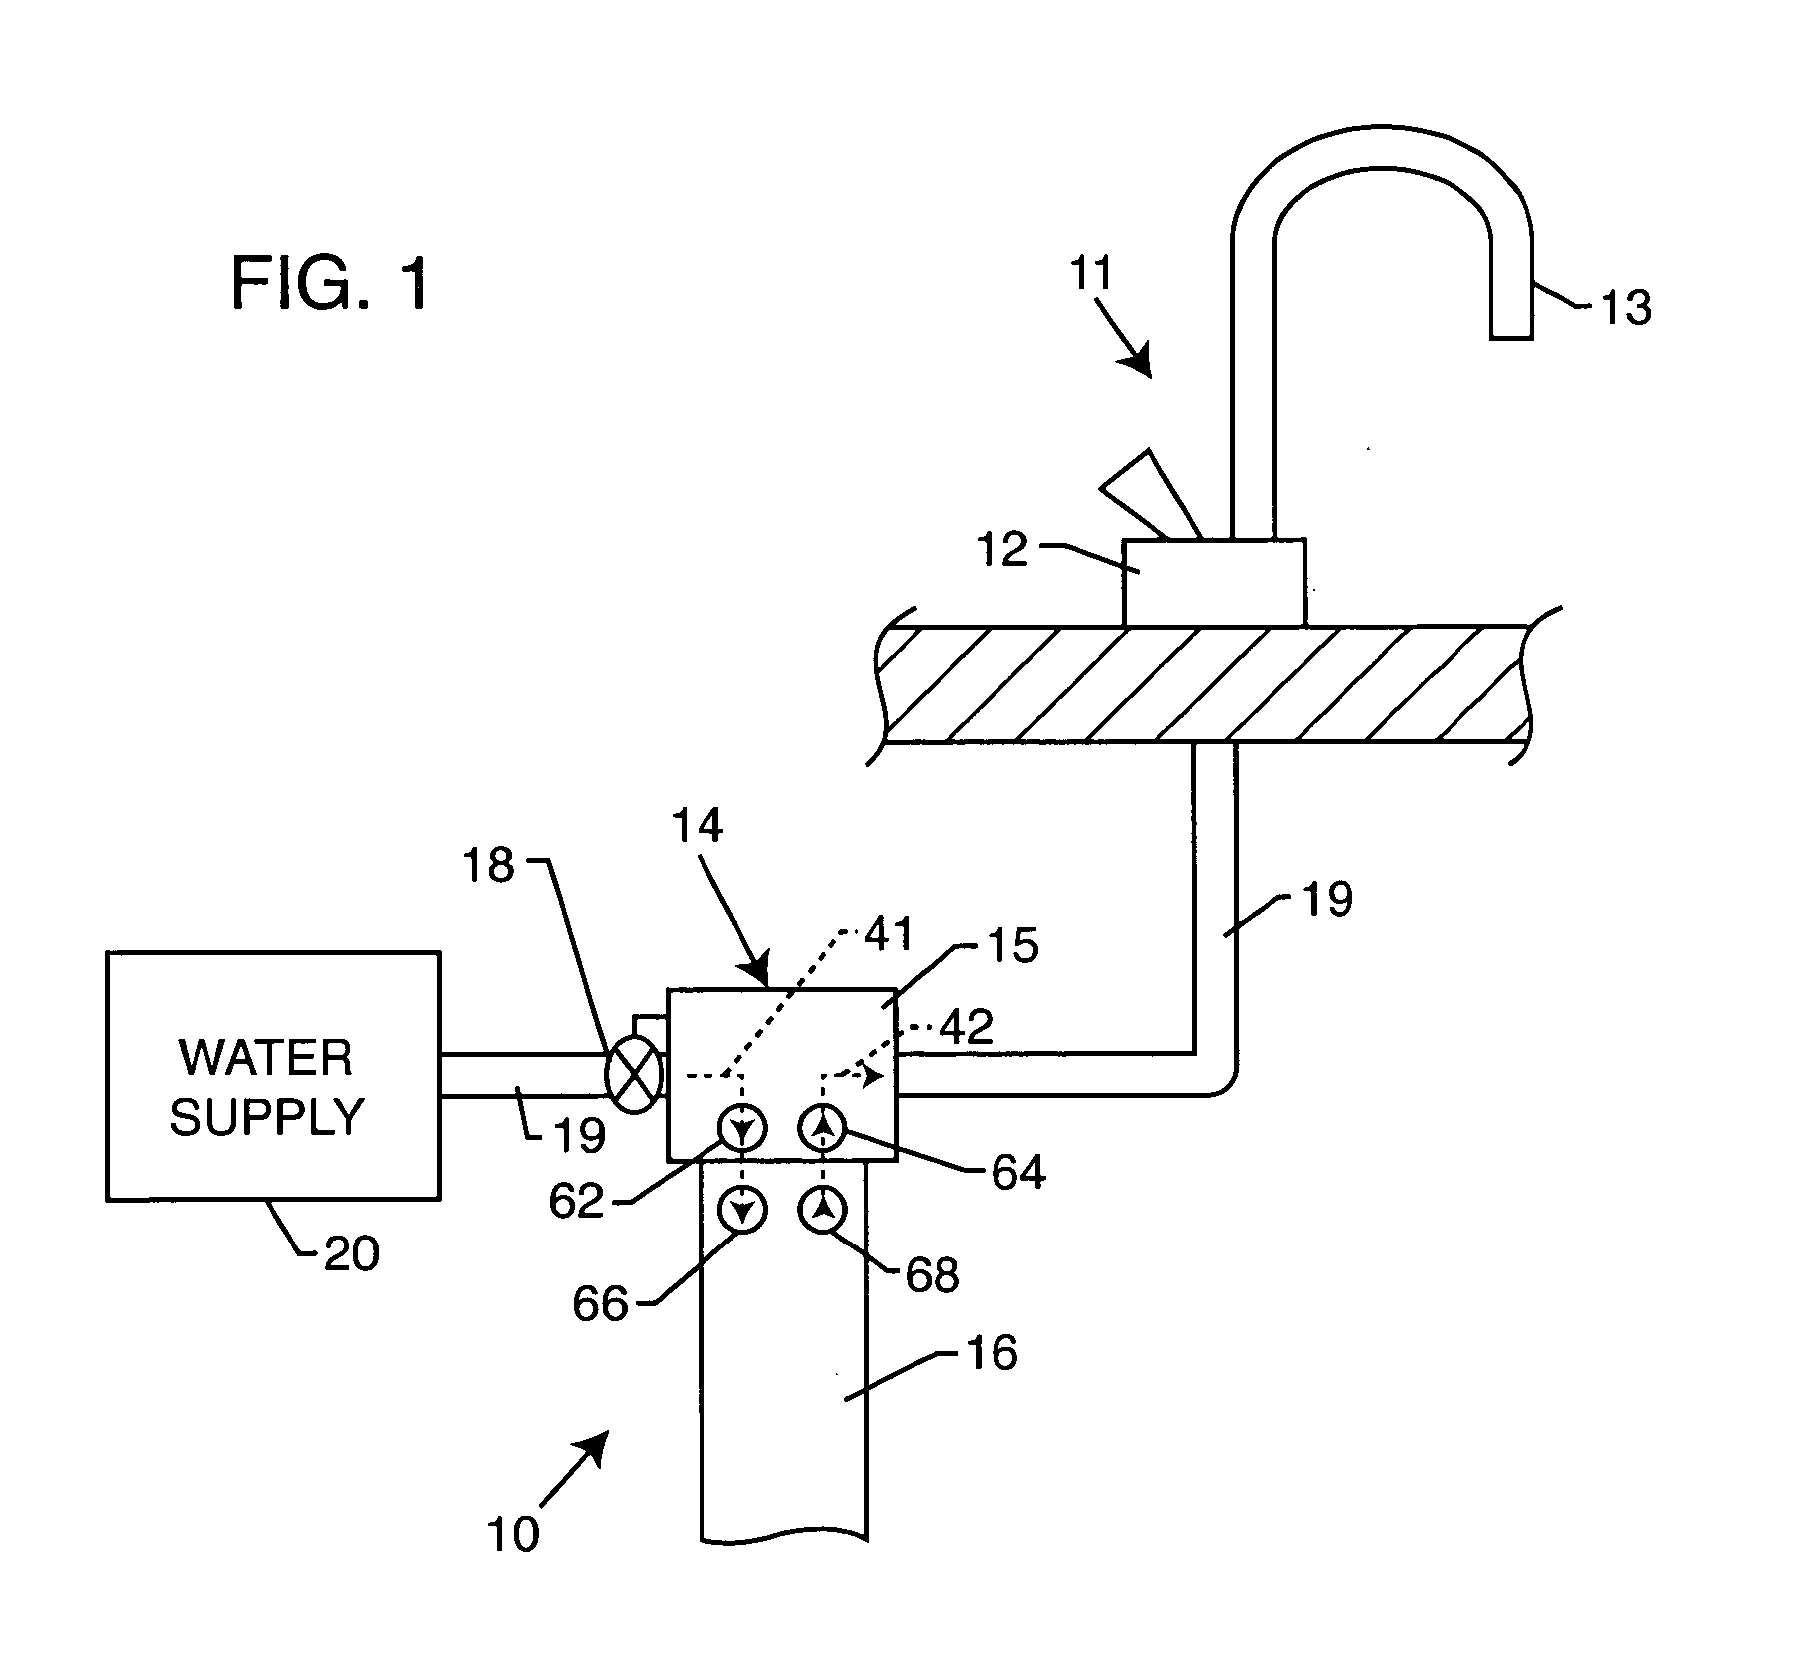 Filter cartridge and manifold for a water purification system